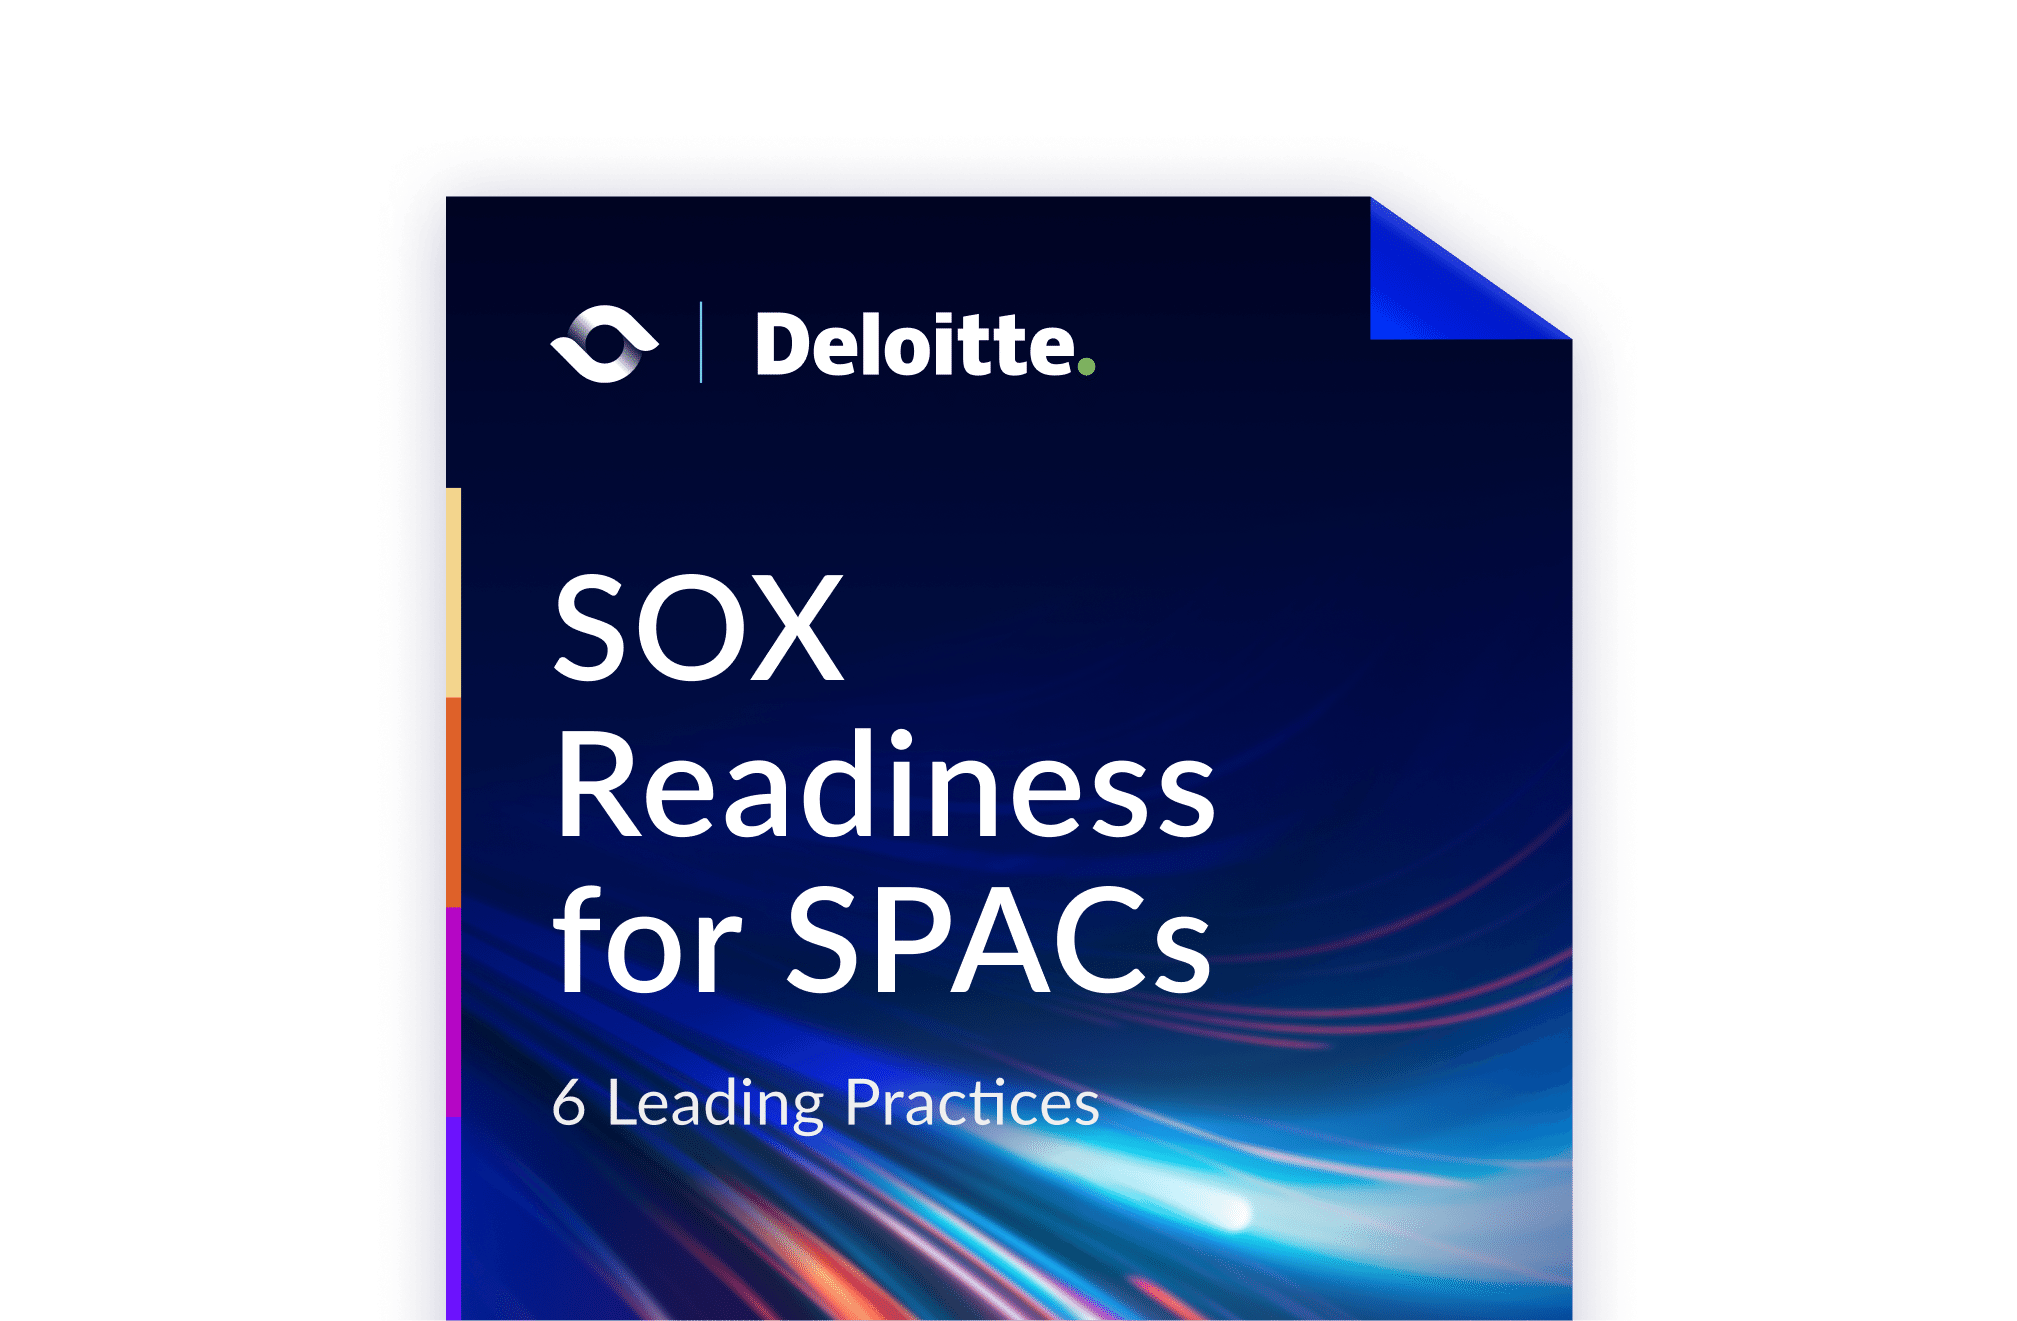 SOX Readiness for SPACS: 6 Leading Practices